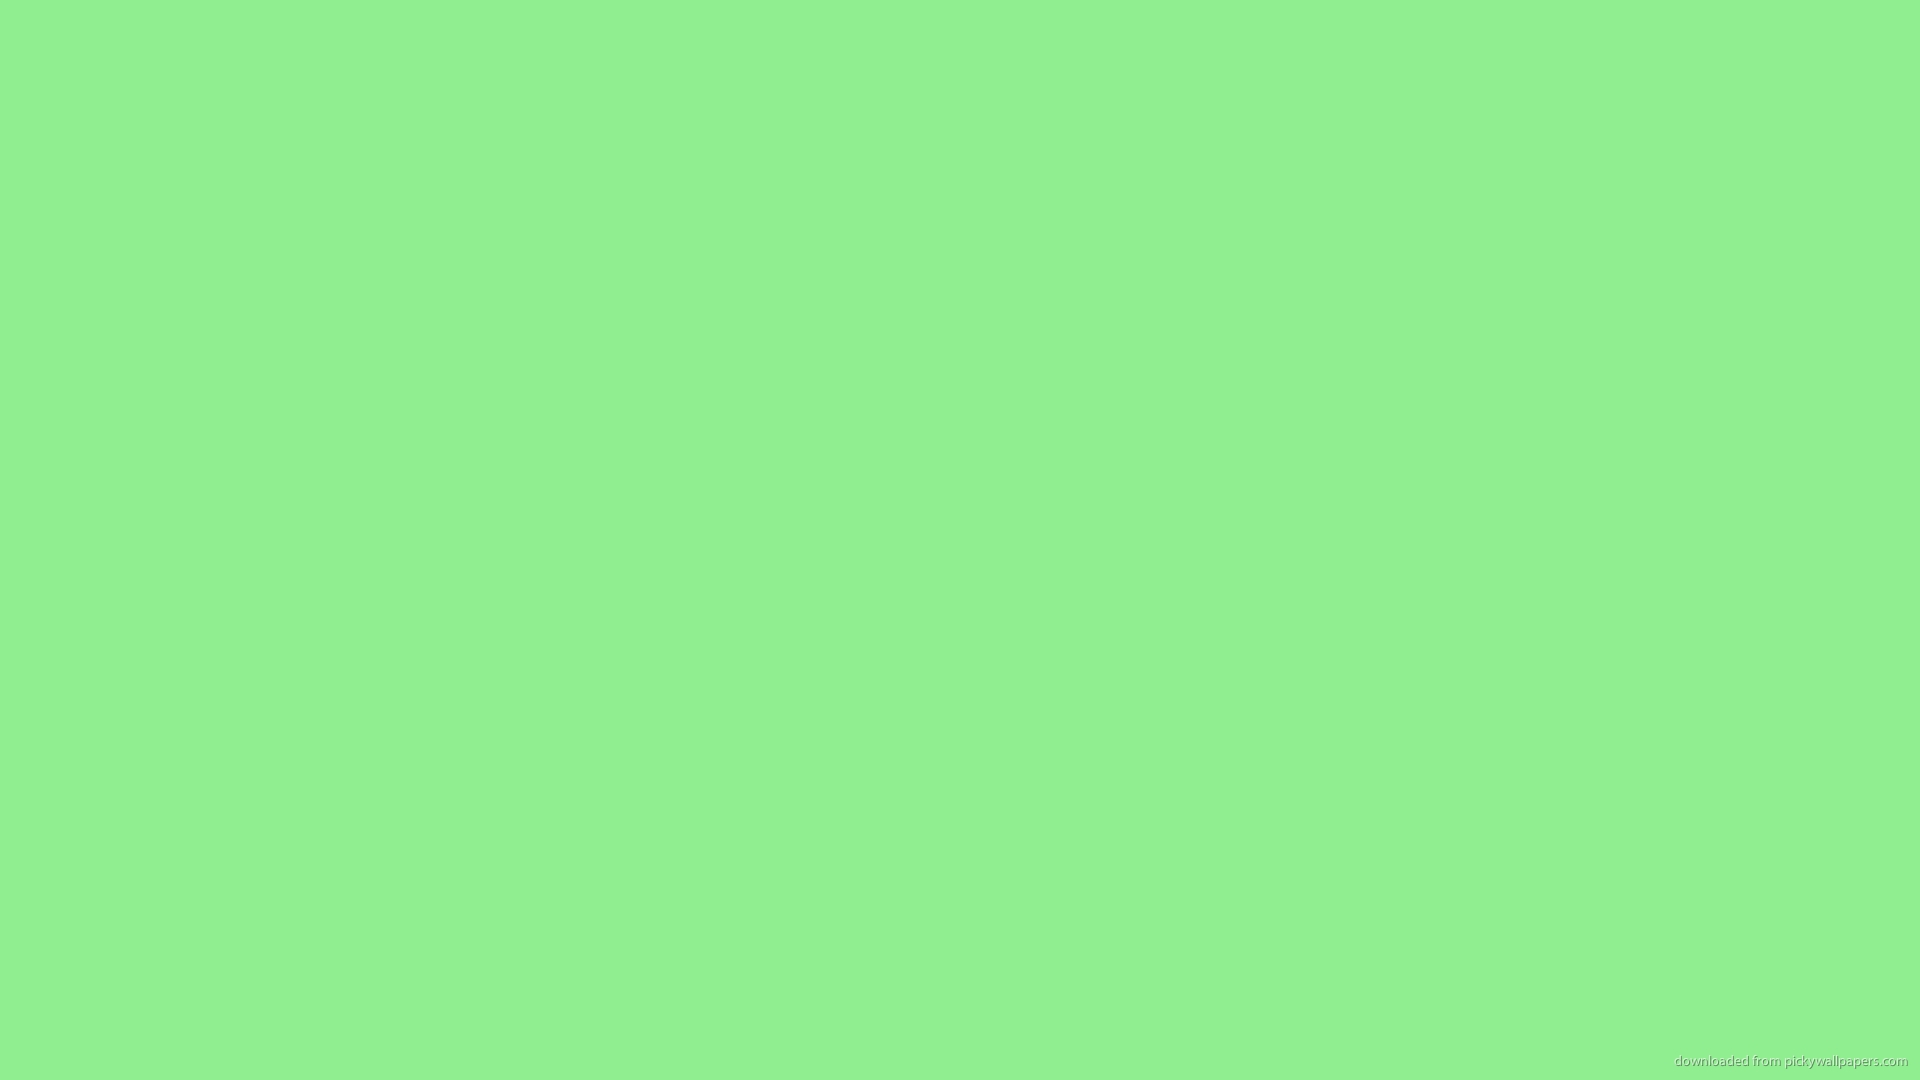 Solid Light Green Color Wallpaper Picture For iPhone Blackberry iPad